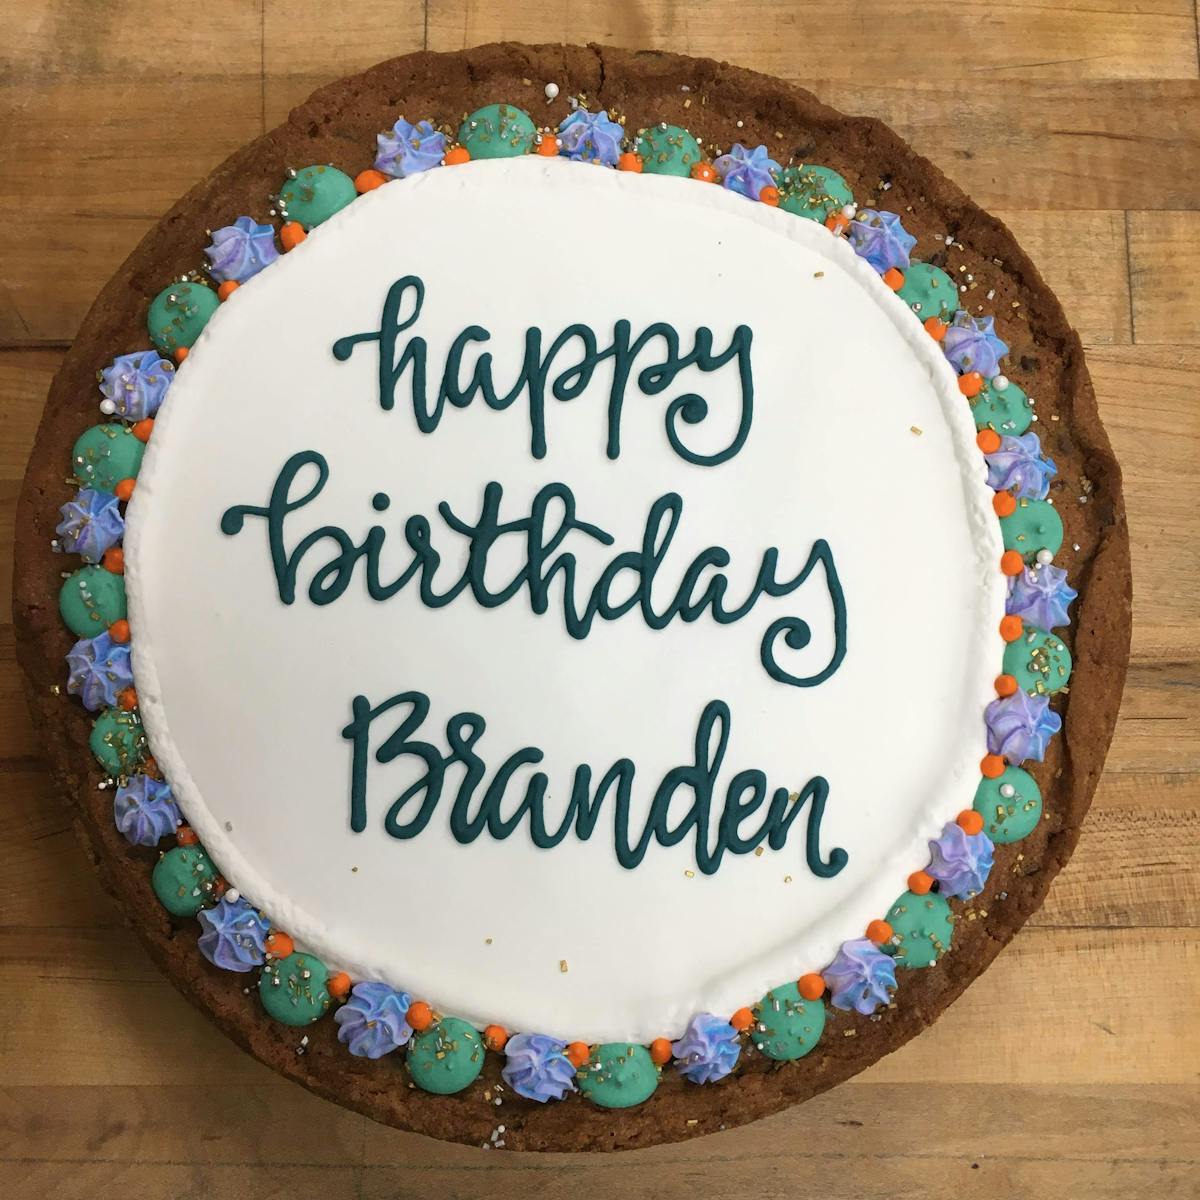 a sign on the side of a birthday cake